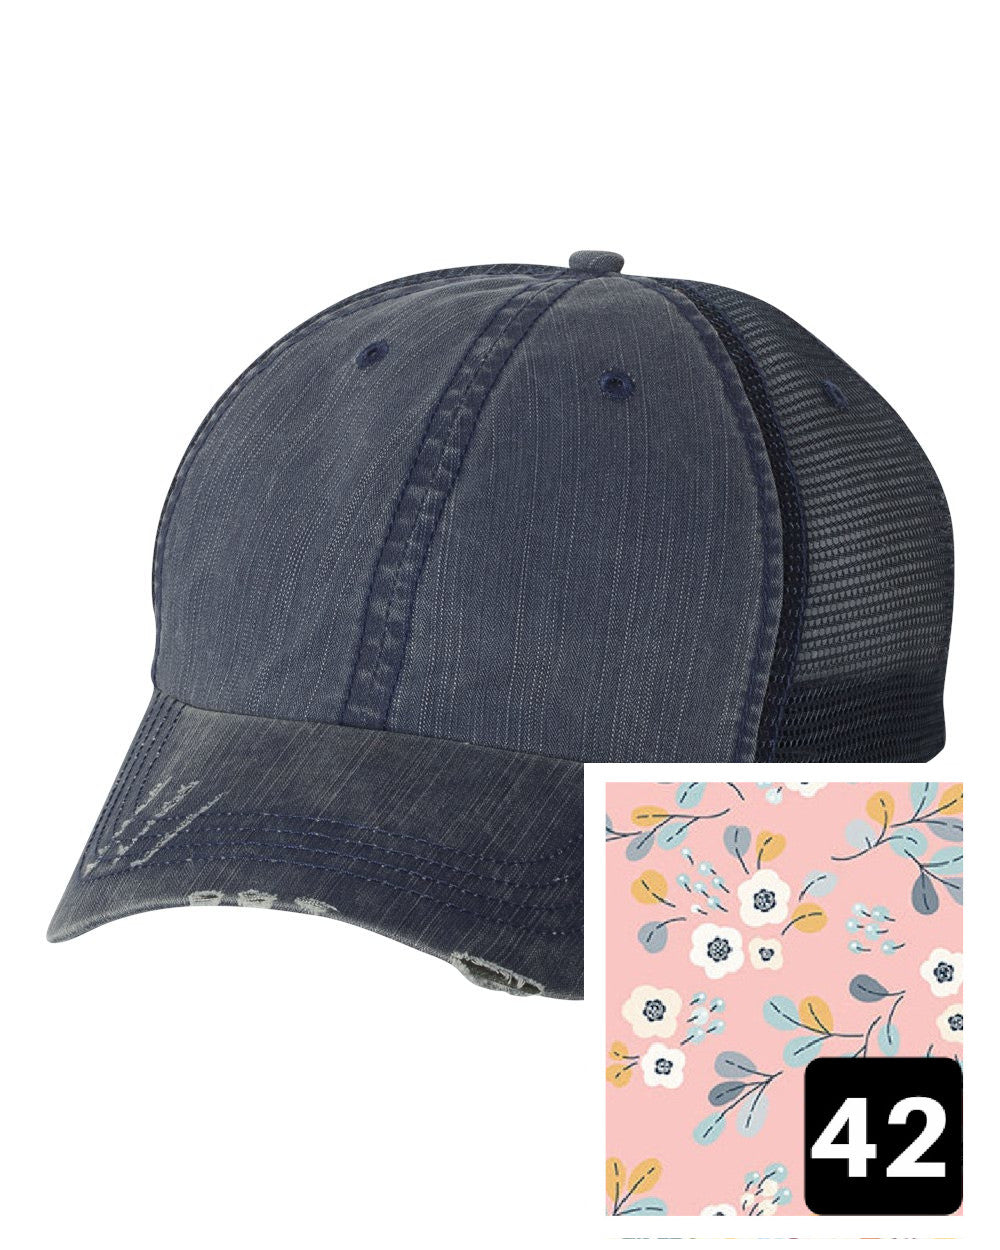 Upper Peninsula of Michigan Hat | Navy Distressed Trucker Cap | Many Fabric Choices